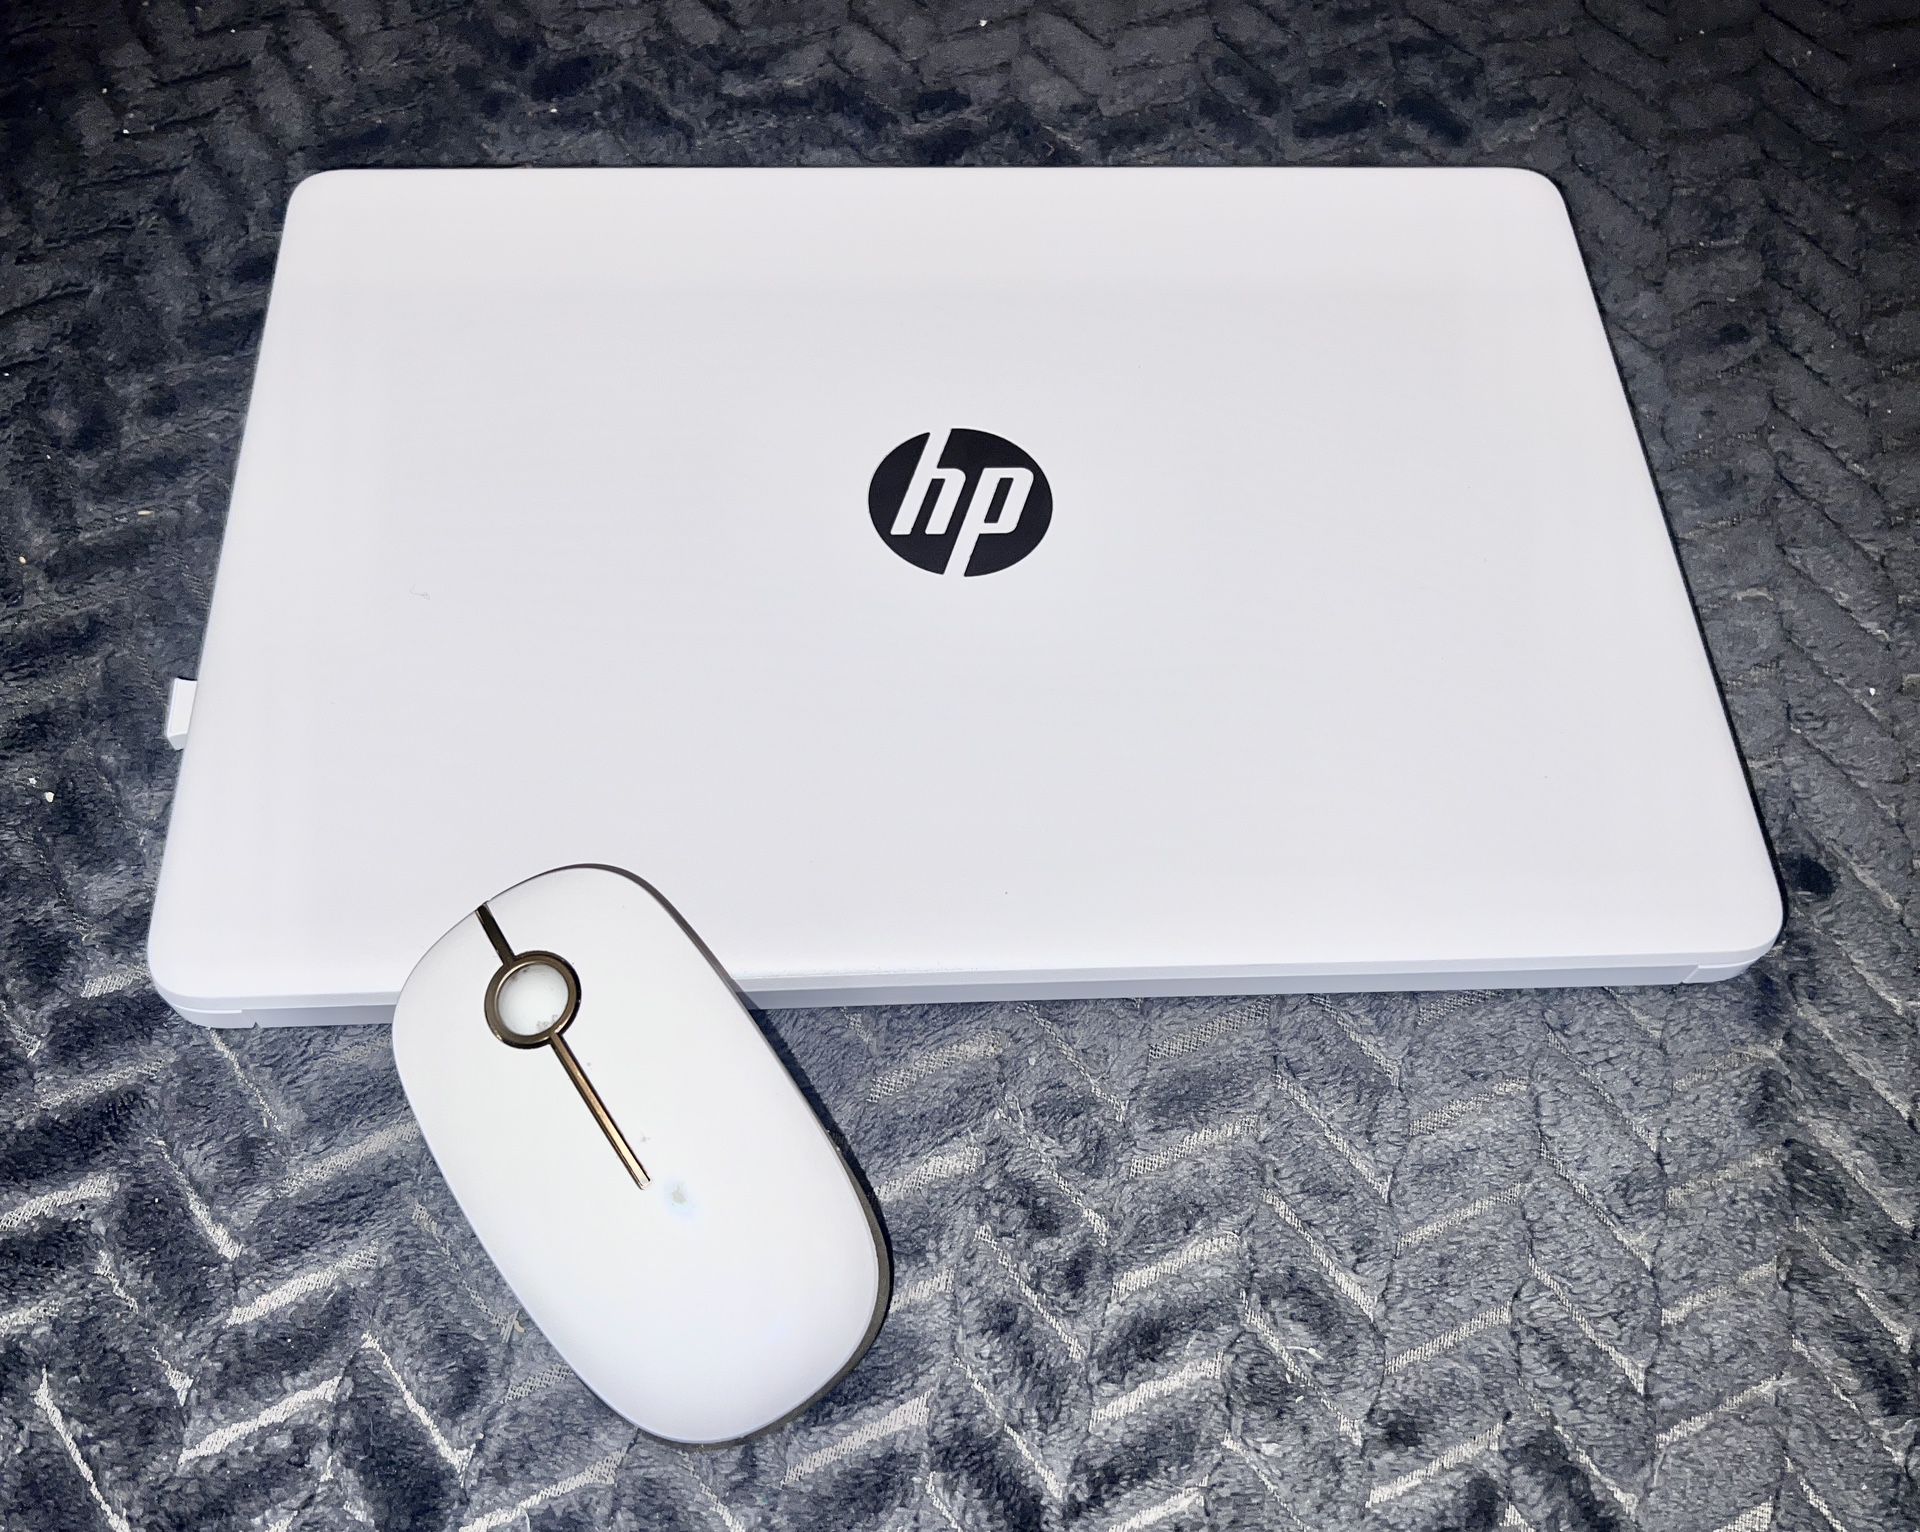 LOWER PRICE!   HP 14" Laptop w/wireless mouse